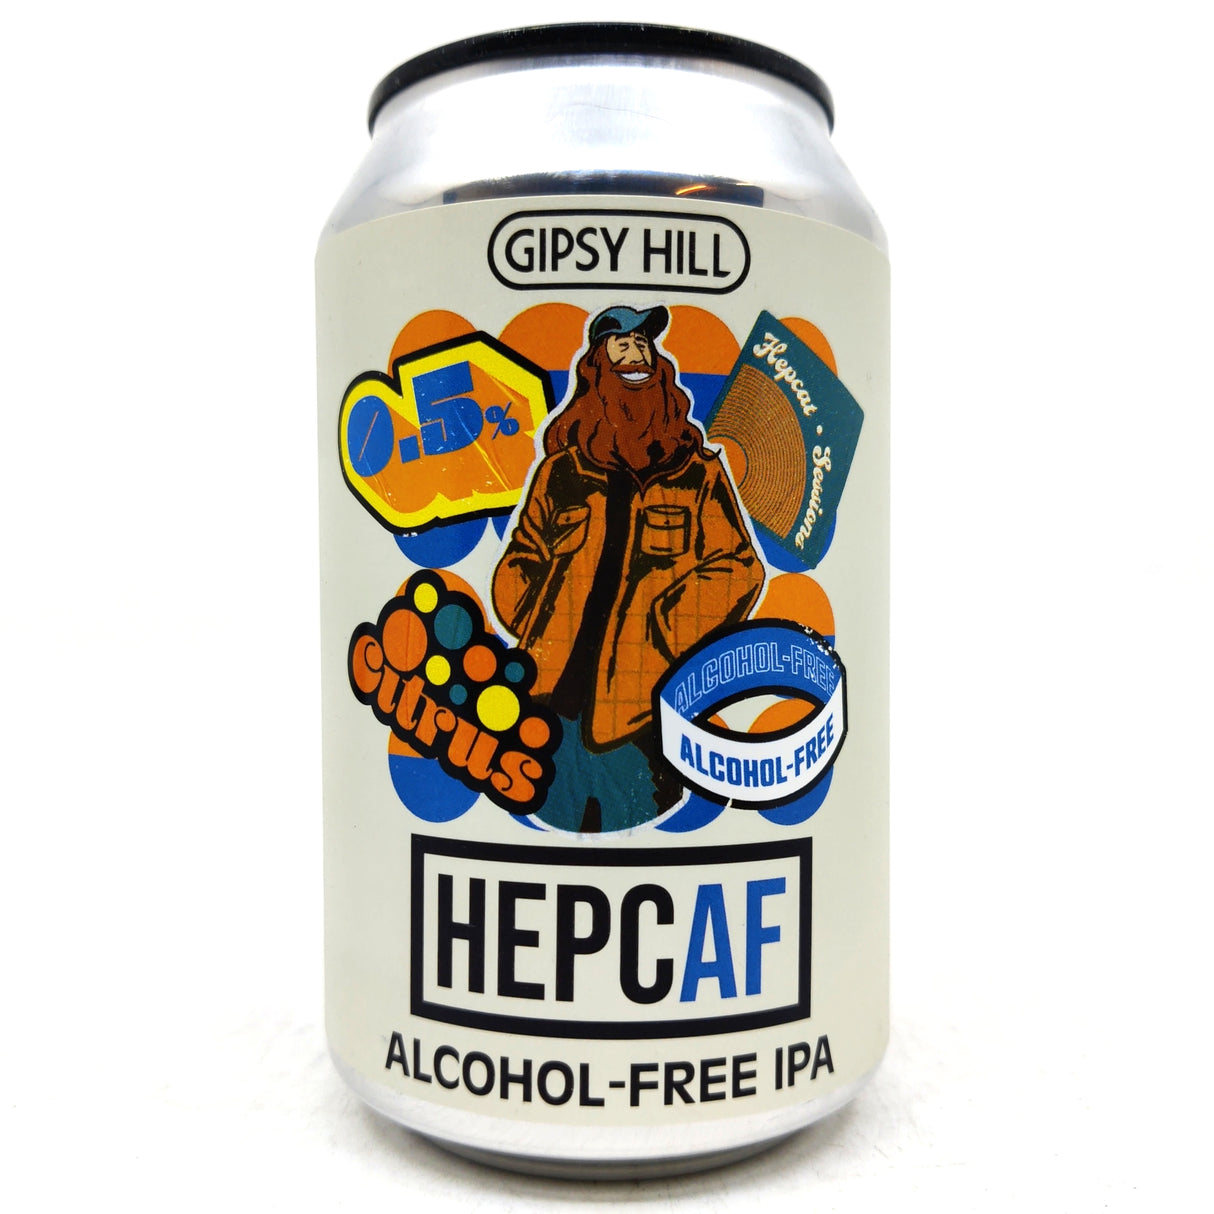 Gipsy Hill HepcAF Alcohol-free IPA 0.5% (330ml can)-Hop Burns & Black